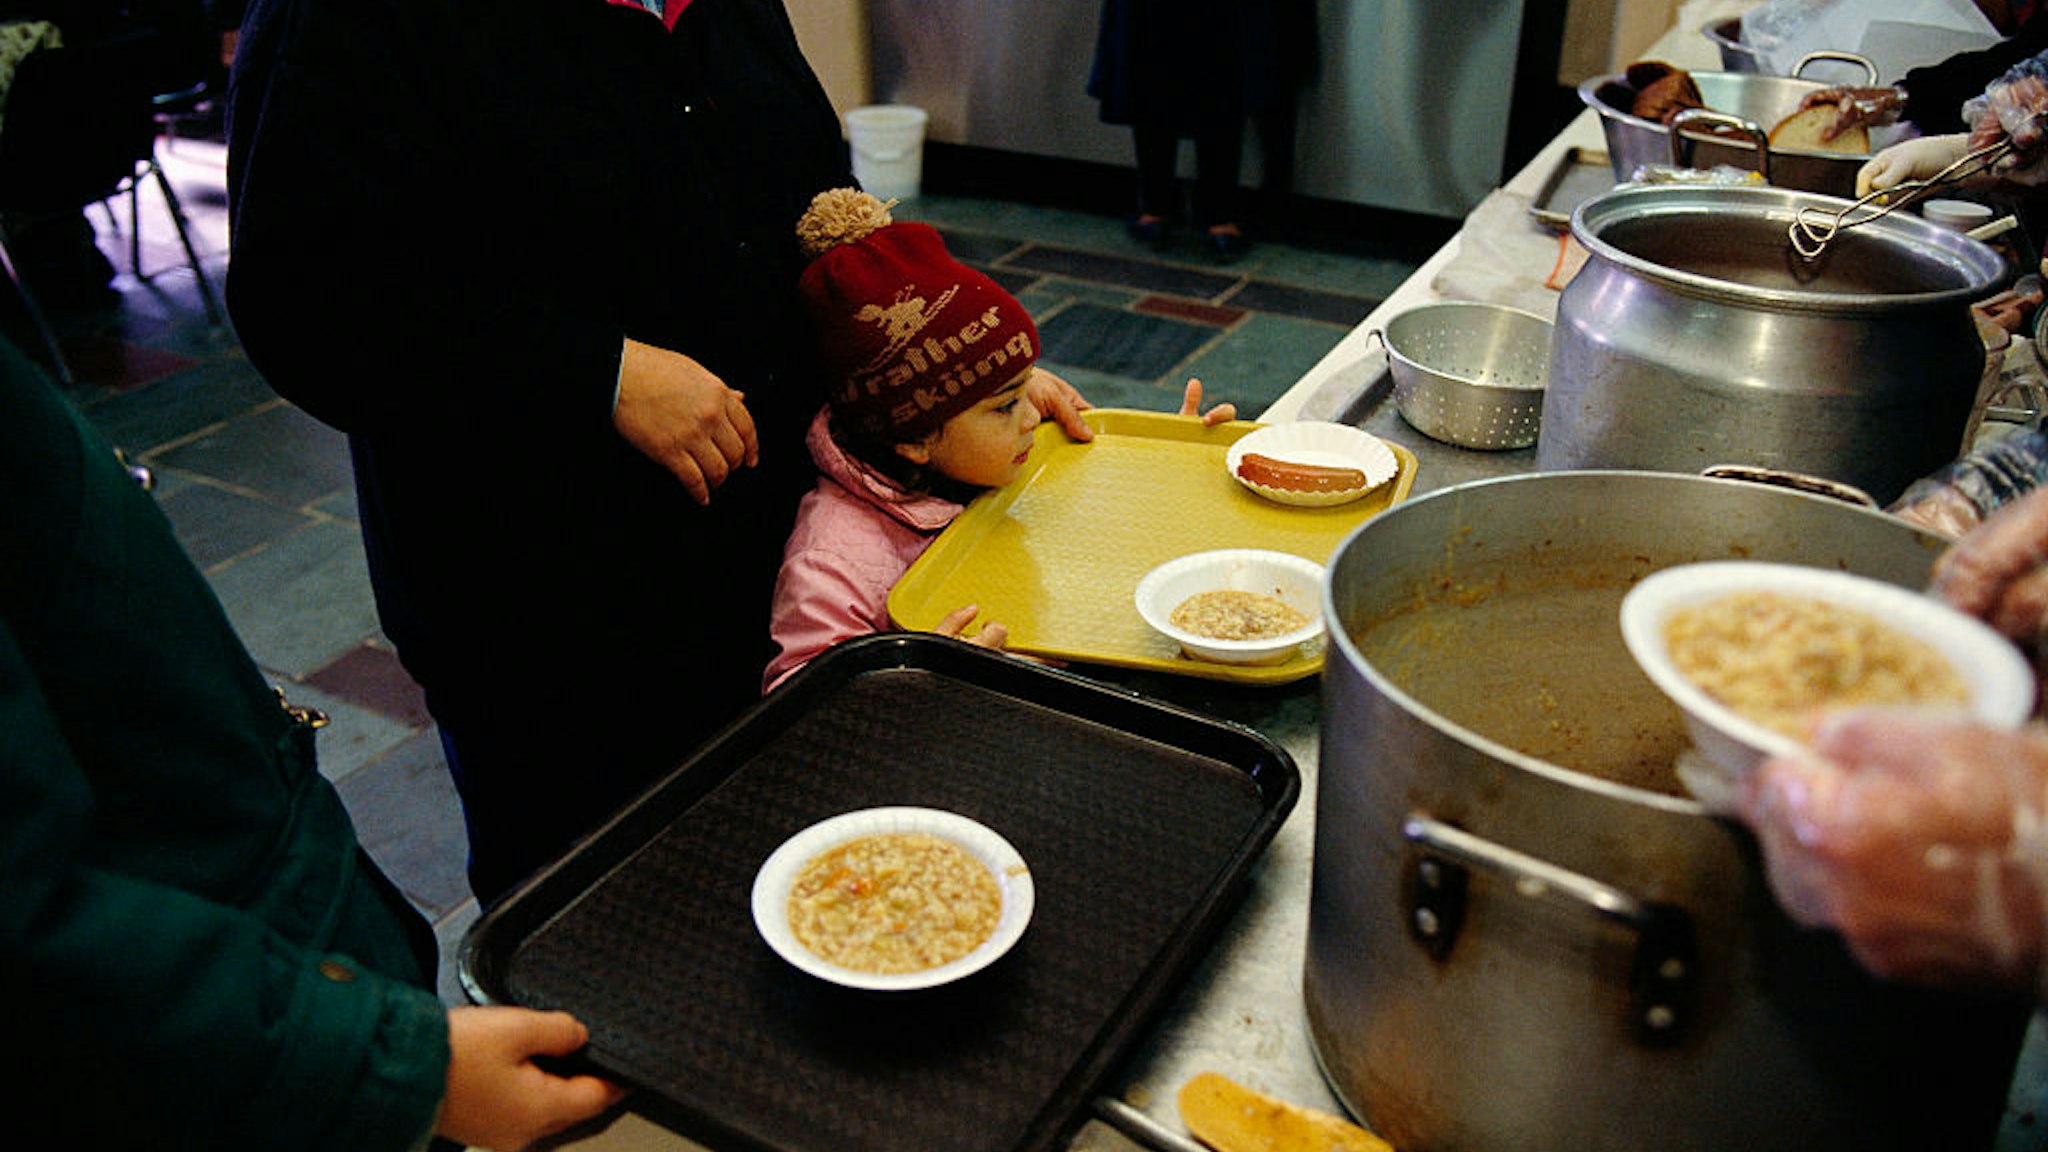 Volunteers with St. John's Bread and Life Soup Kitchen feed the poor and the homeless in New York City. (